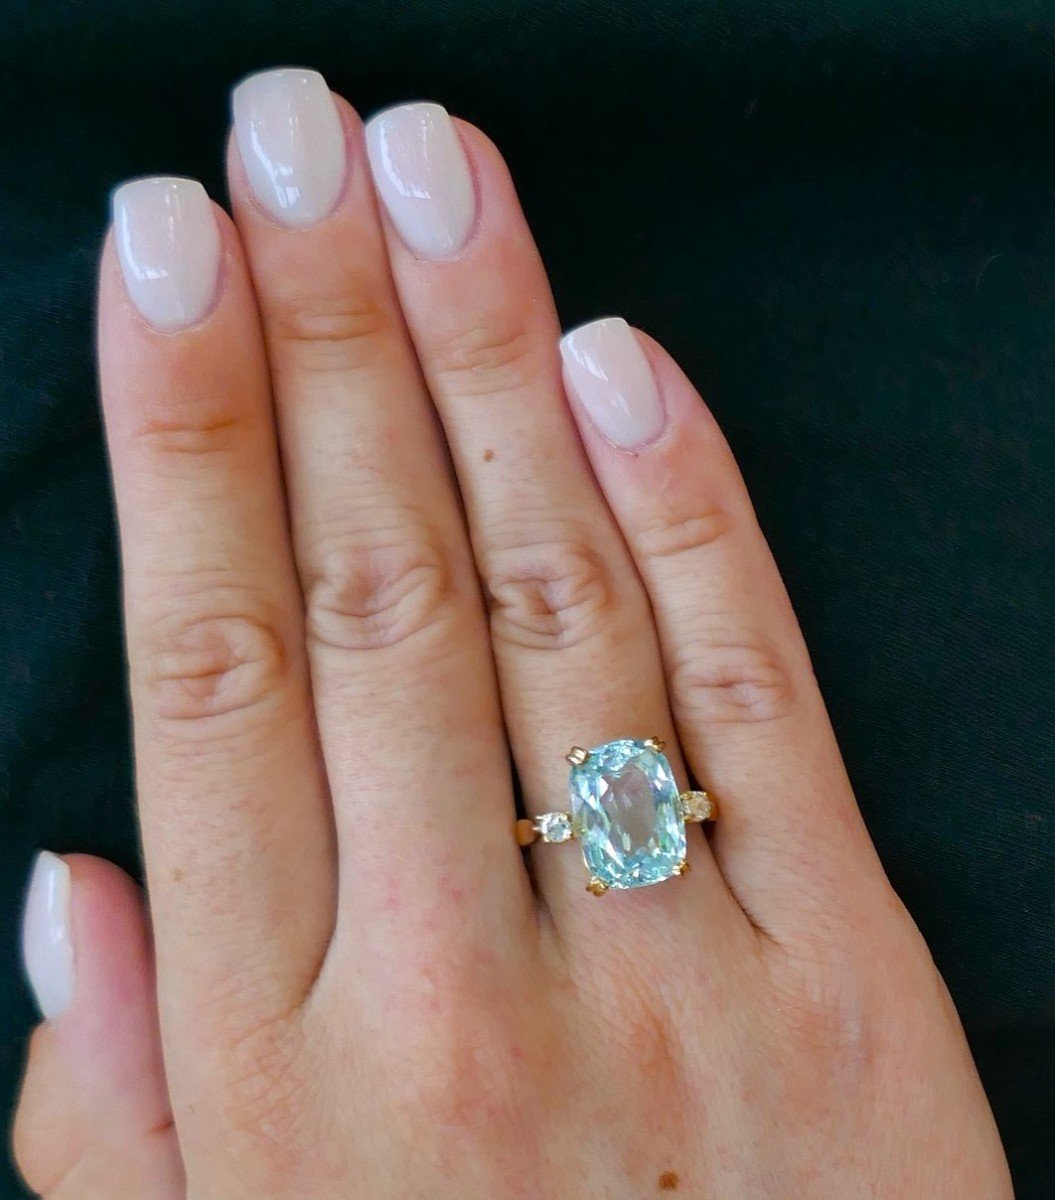 Ring Adorned With An Aquamarine And Diamonds.-photo-4